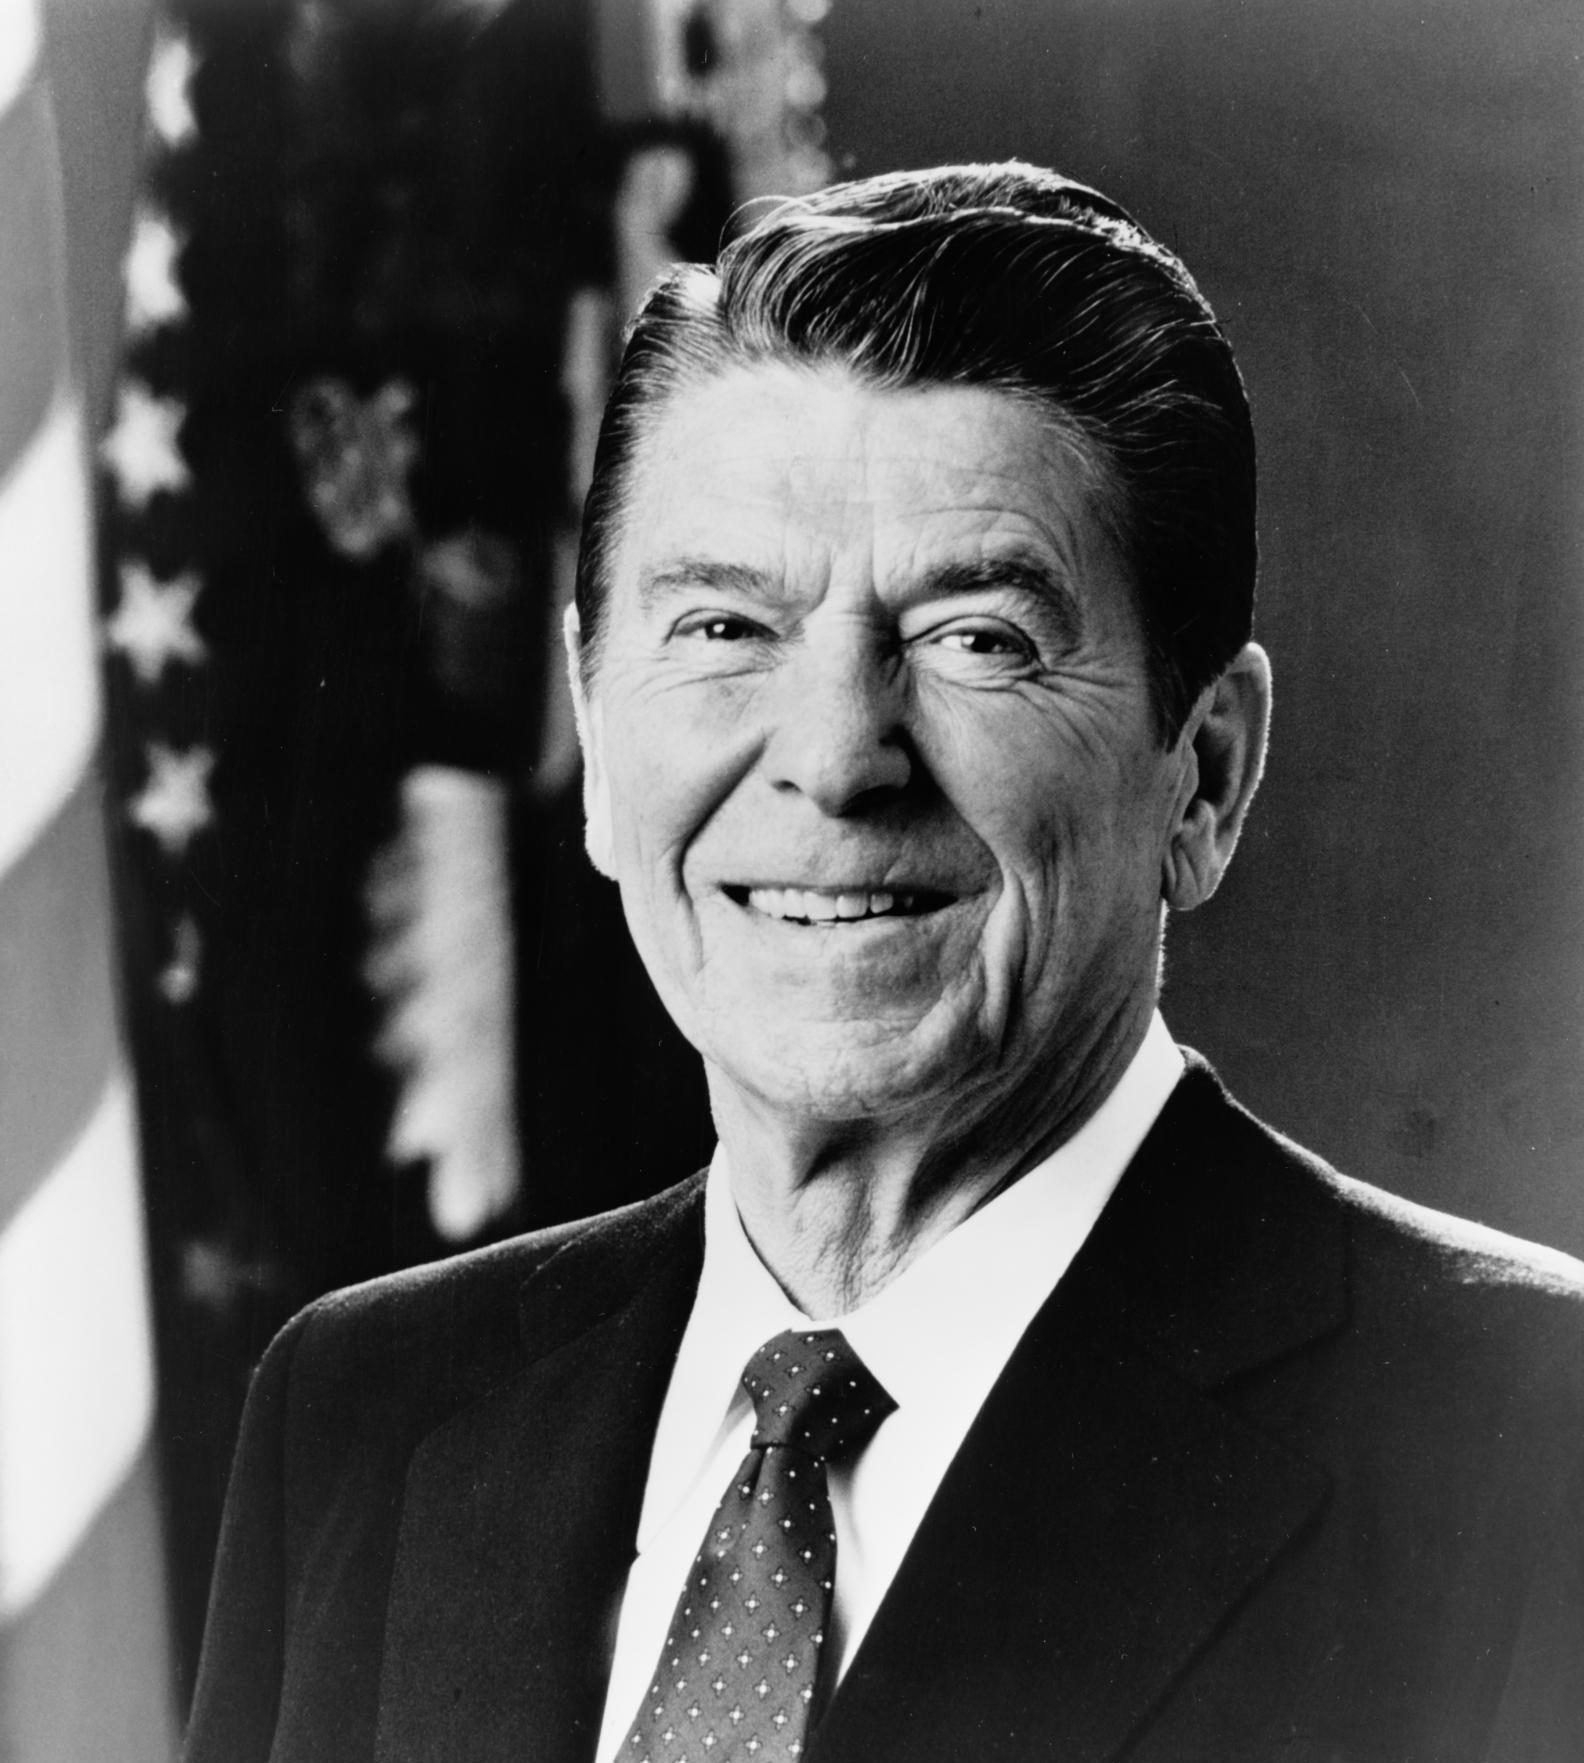 Reagan I: The Moral Majority and current Christian Nationalism